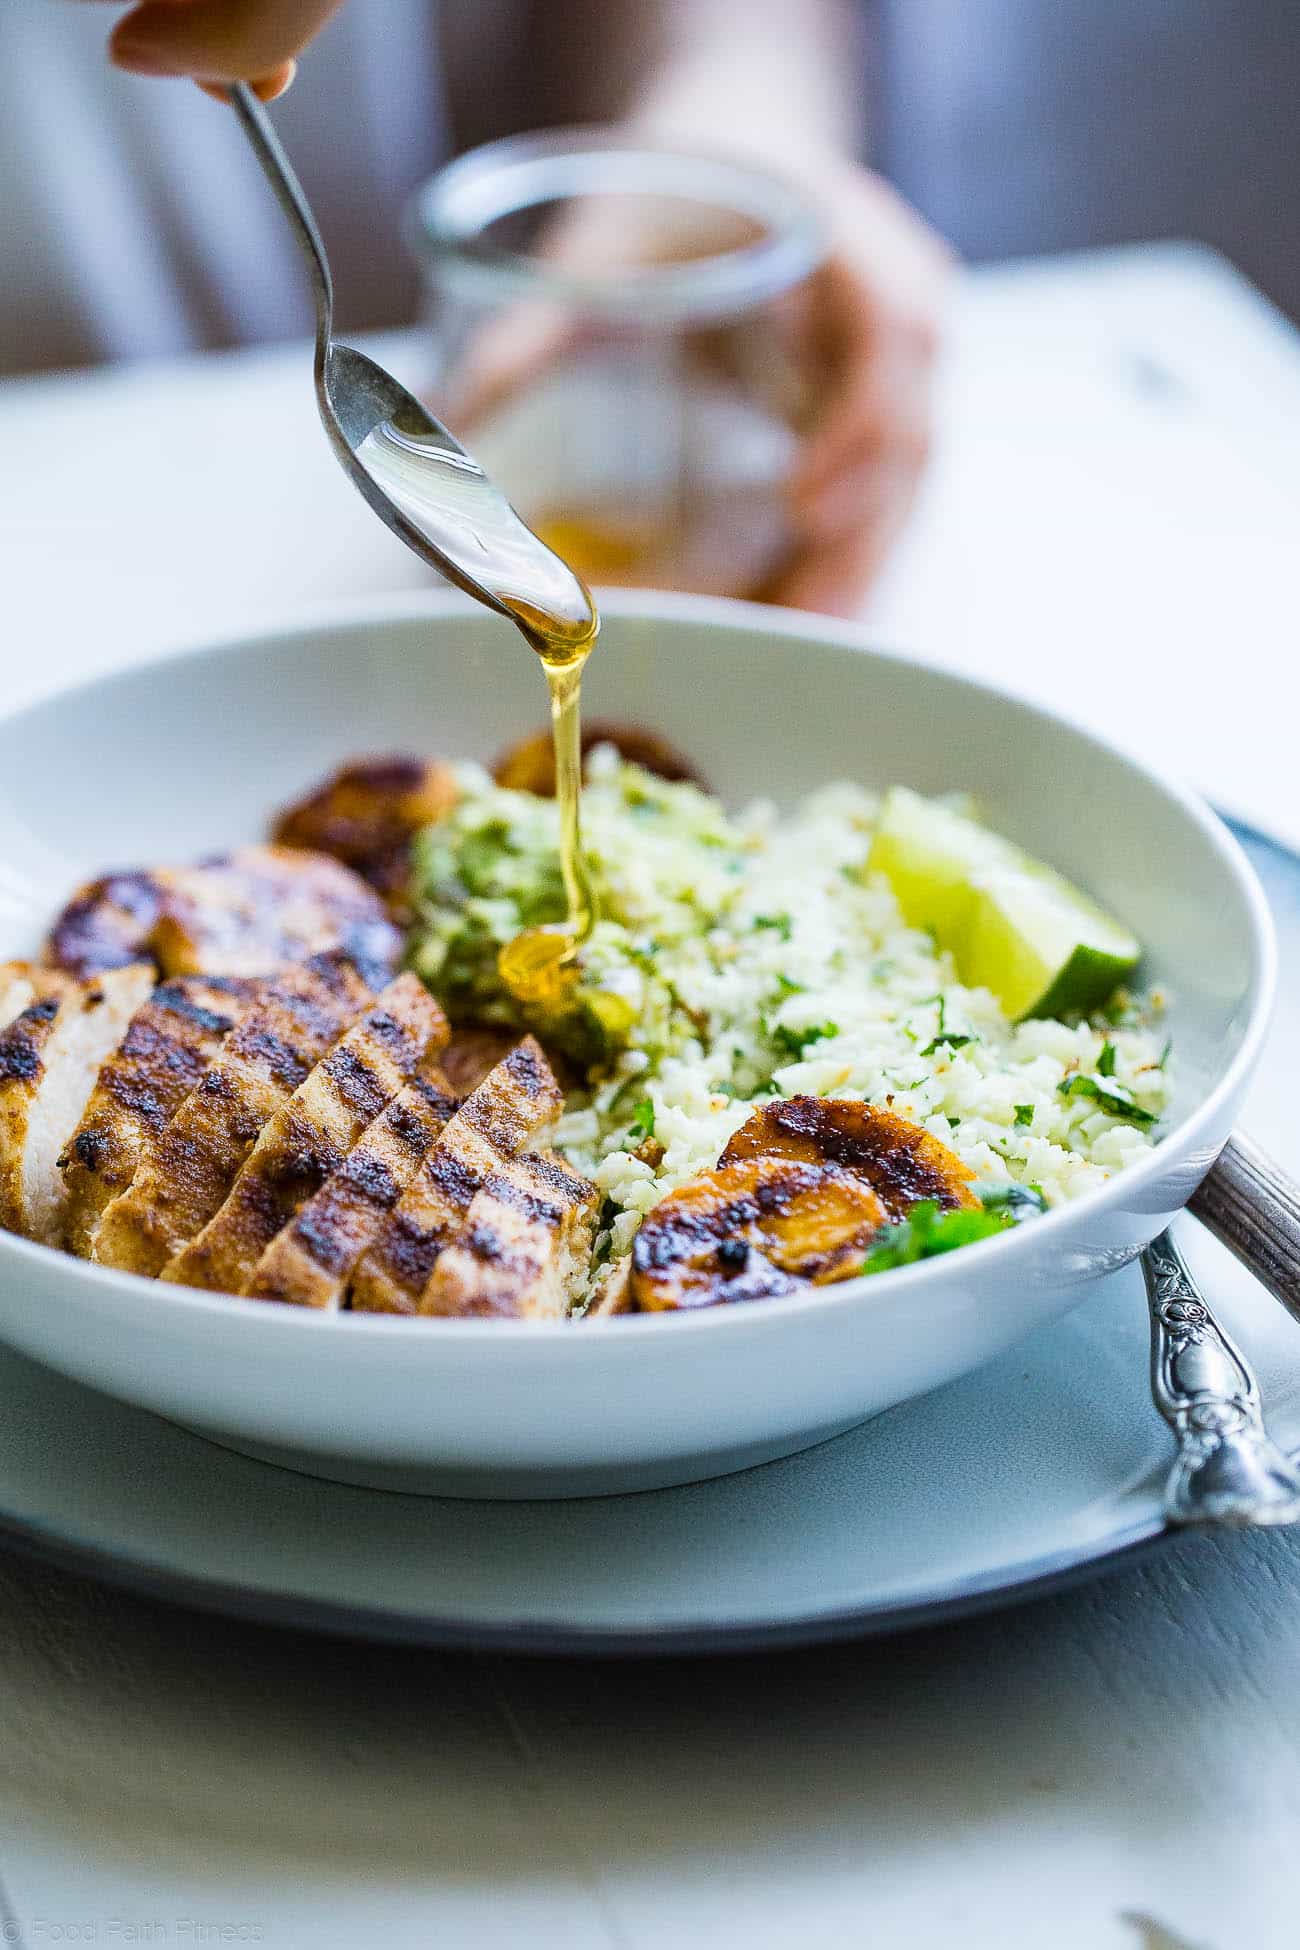 Caribbean Chicken Bowls - These paleo-friendly bowls have grilled plantains, cauliflower rice and avocado! A healthy, gluten free summer meal for under 500 calories! | #Foodfaithfitness | #Paleo #Glutenfree #Healthy #chickenrecipe